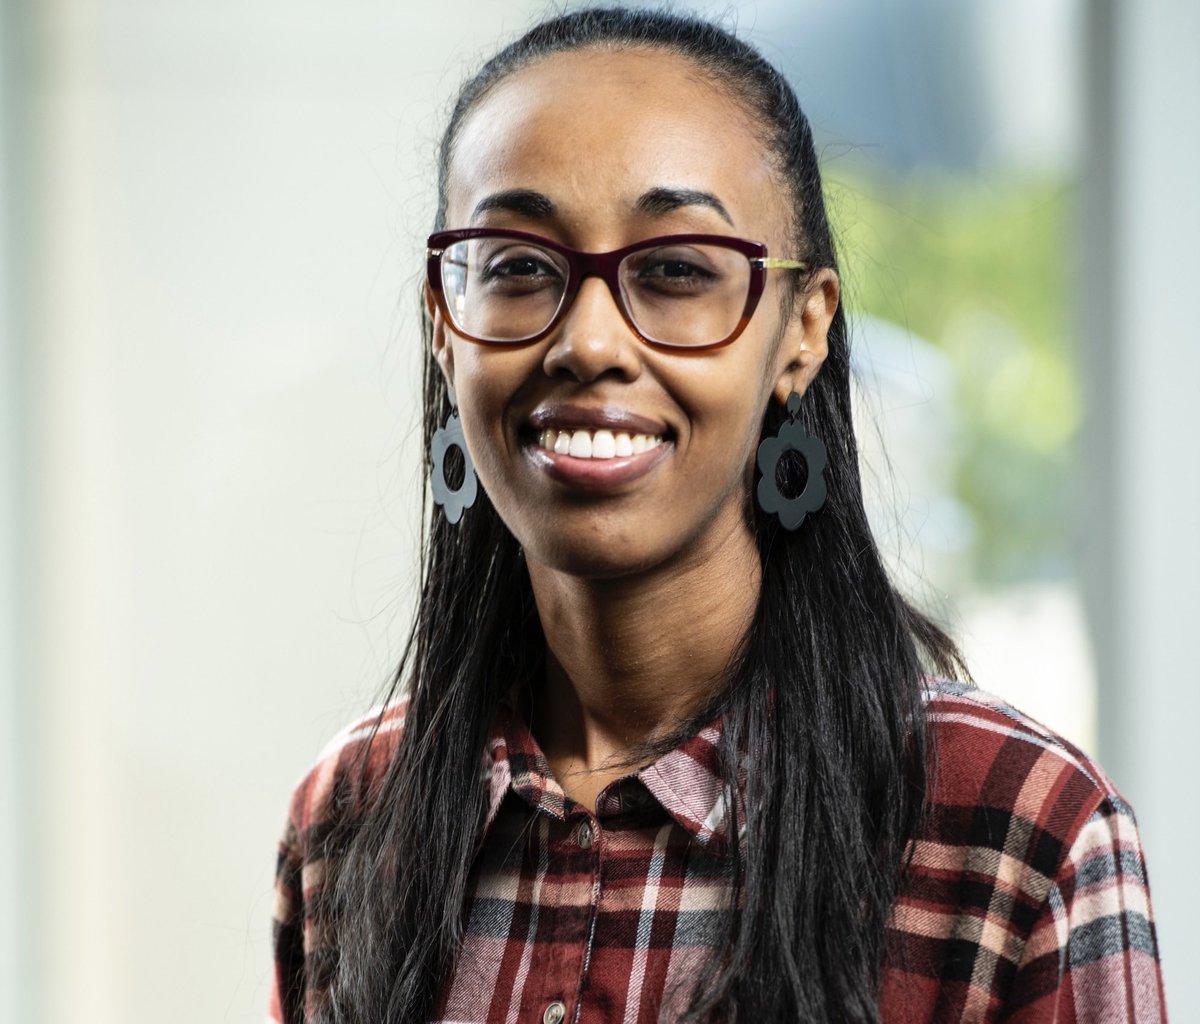 Please welcome our new colleague, Erome Daniel! Erome will start the postdoc phase of her appointment, in the @PflumLab, this summer as part of the Pathways to Faculty Fellowship at #wsuchemistry. #ChemBio